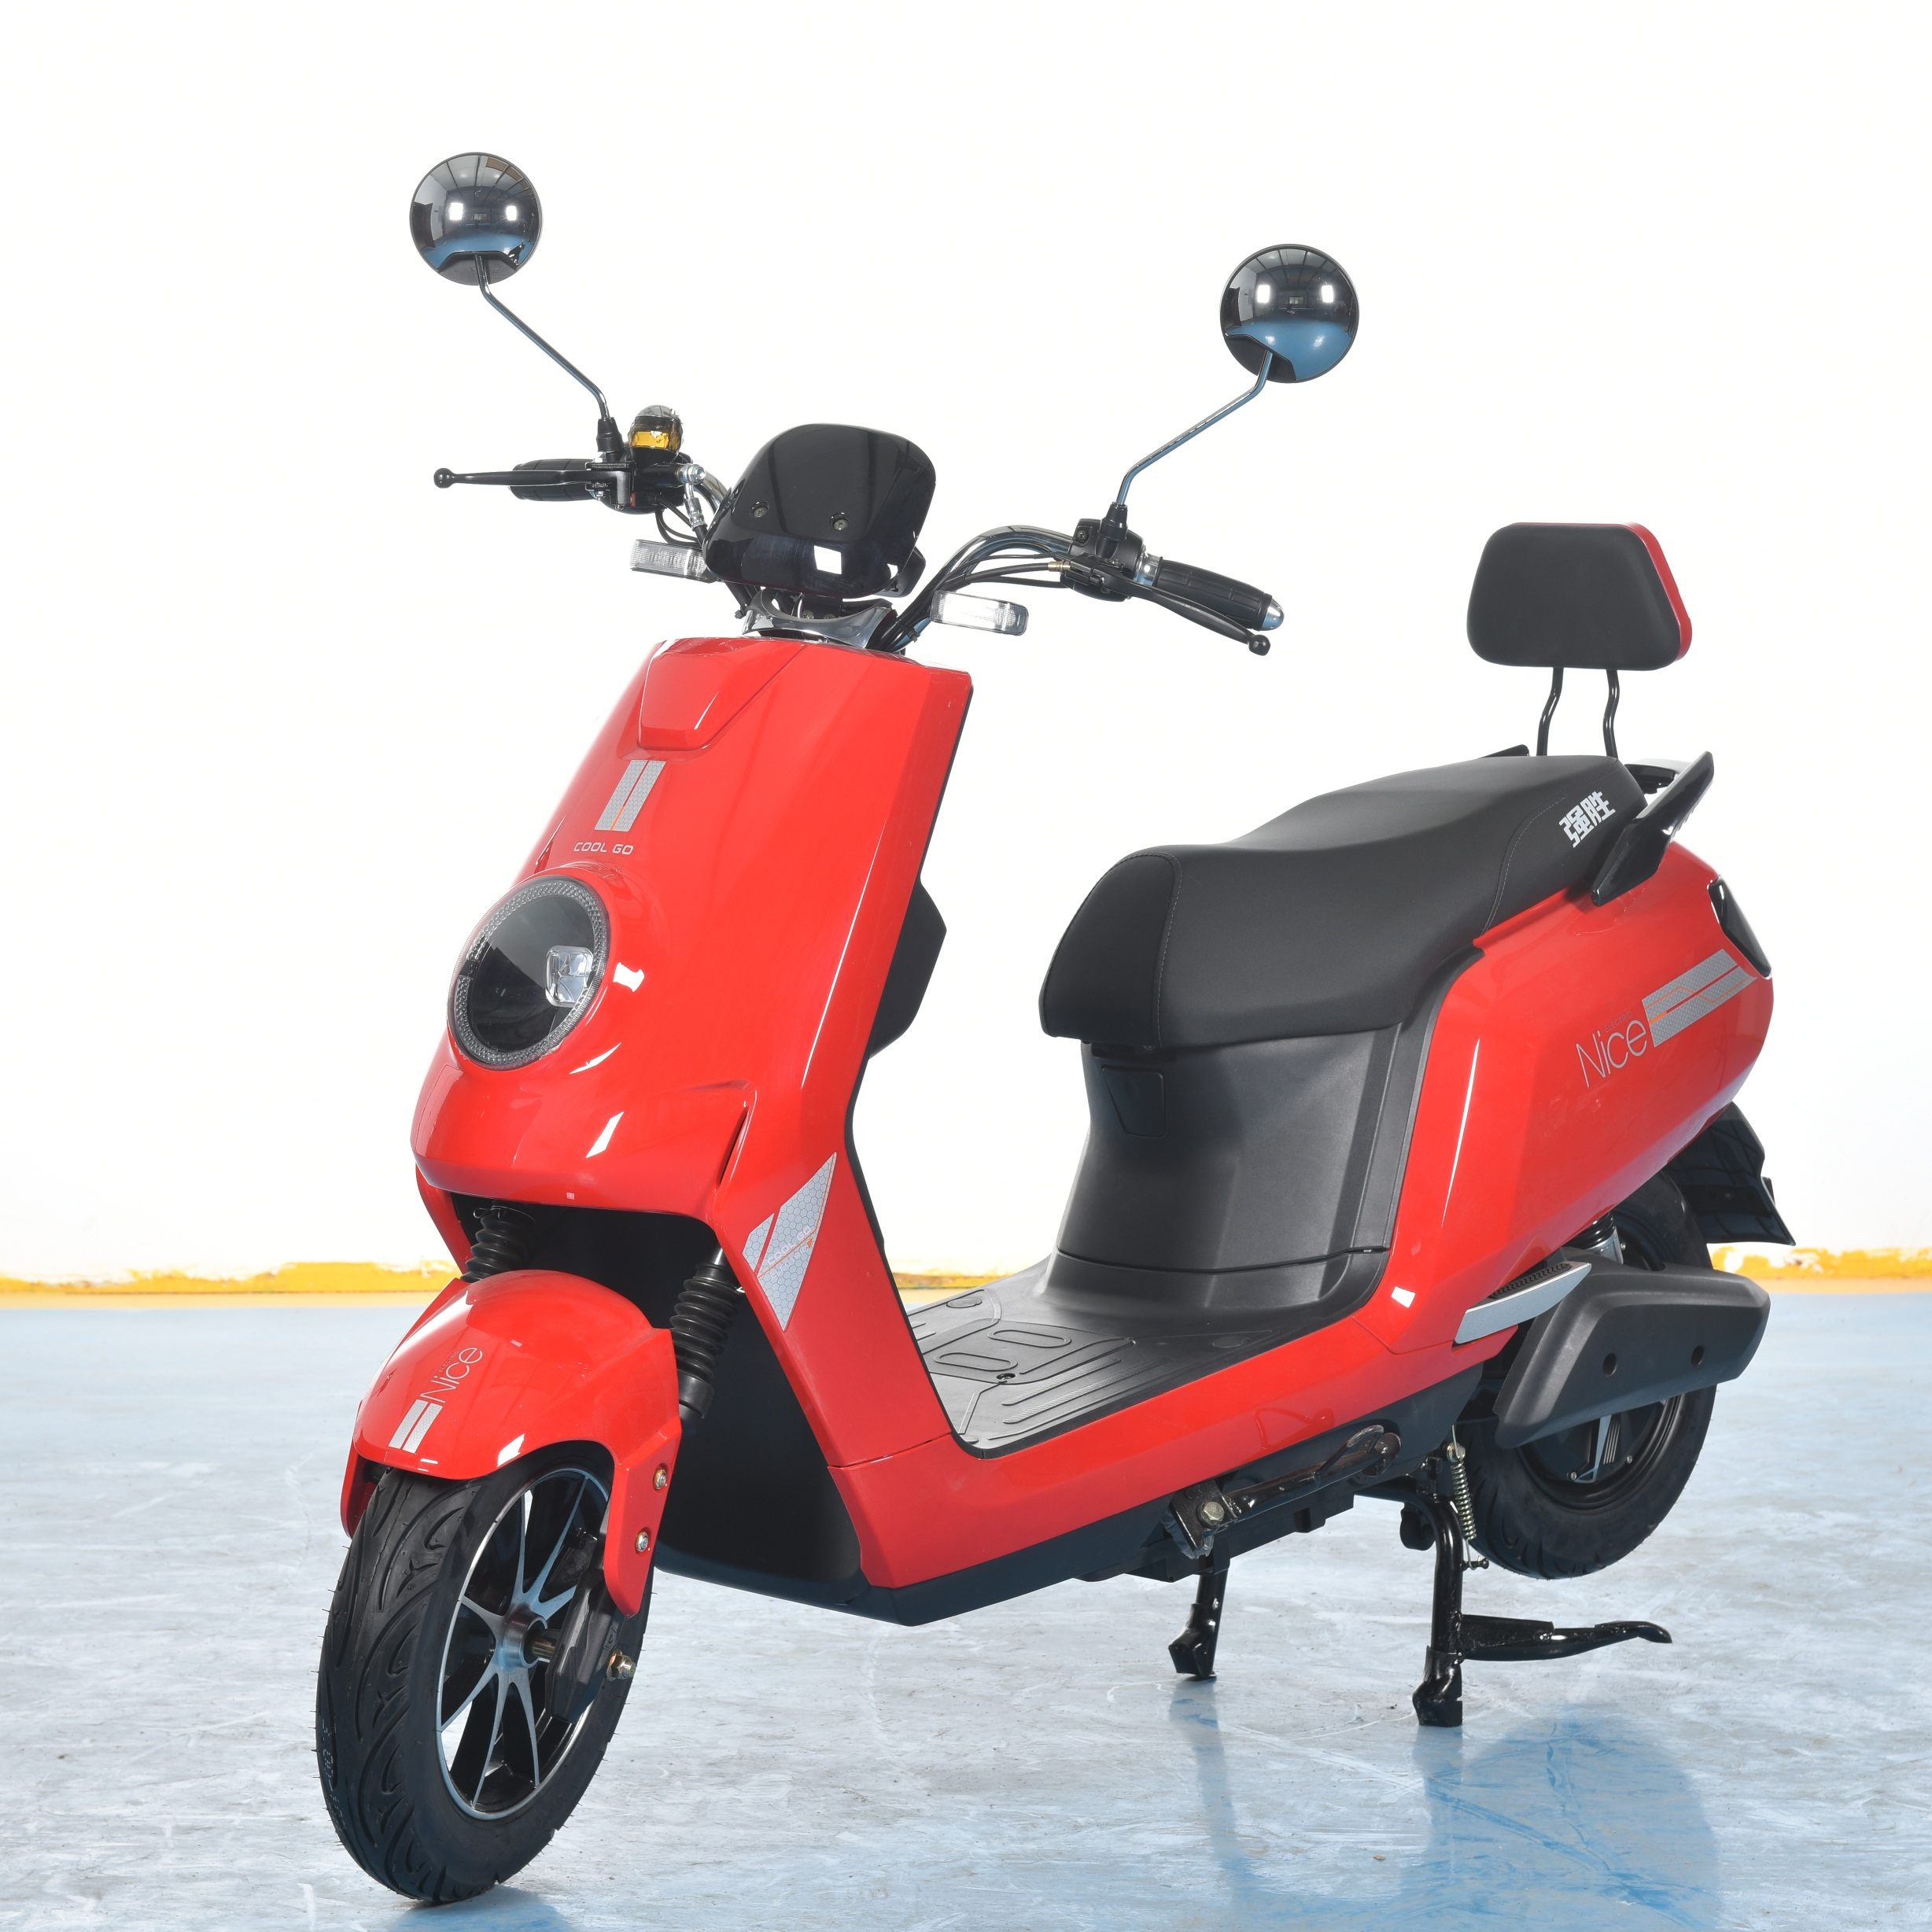 China Wholesale Electric Motorcycle Adult Manufacturers - 2020 New design electric cargo bike  Hot sale electric bike China supply  e bicycle – Qiangsheng